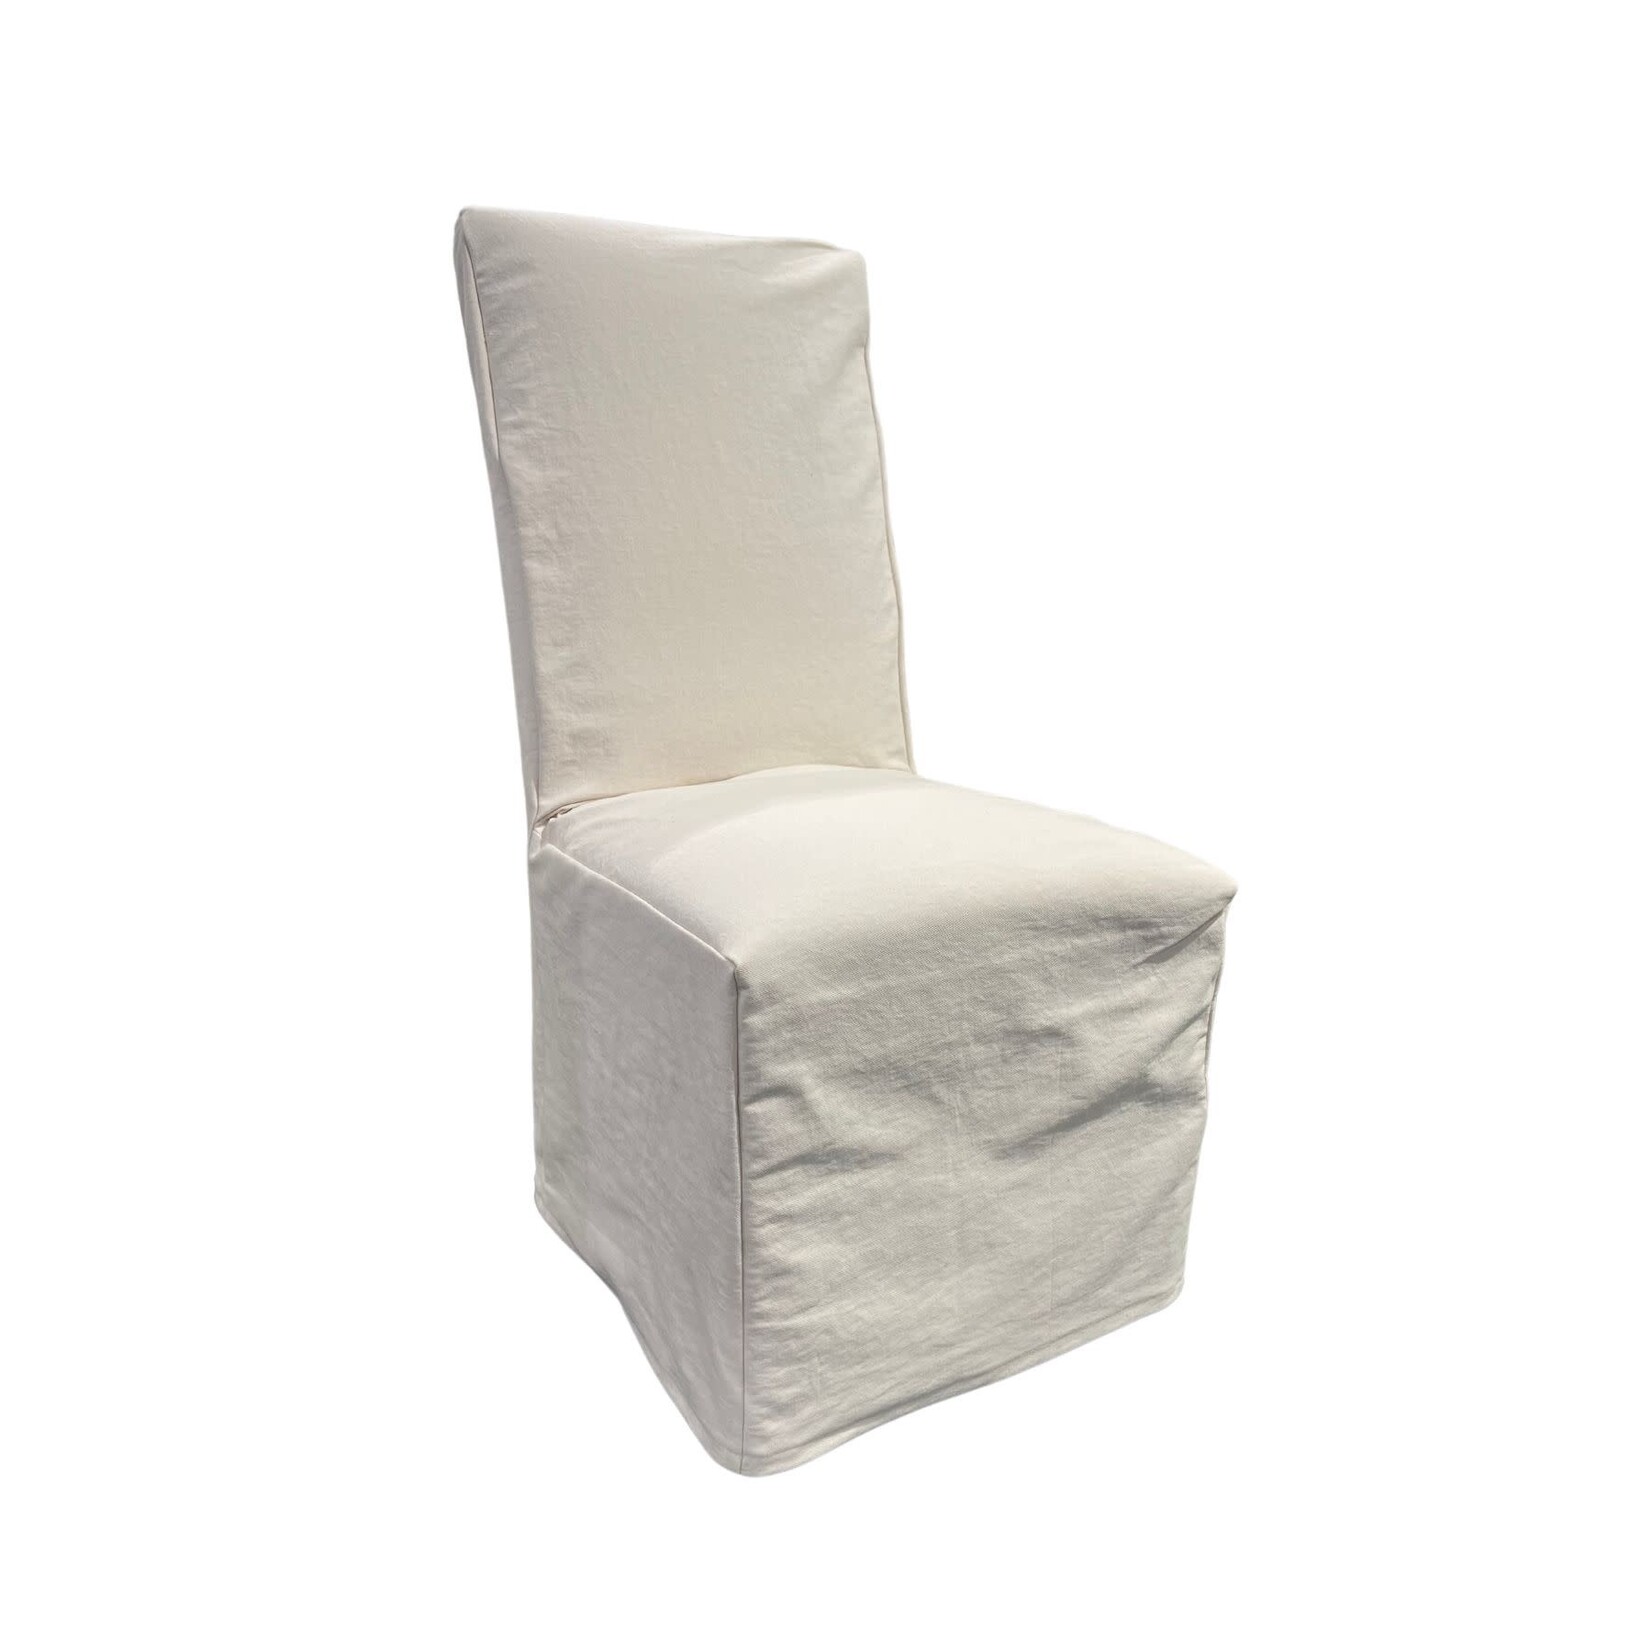 Outside The Box Natural Performance Fabric Slip Cover Dining Chair